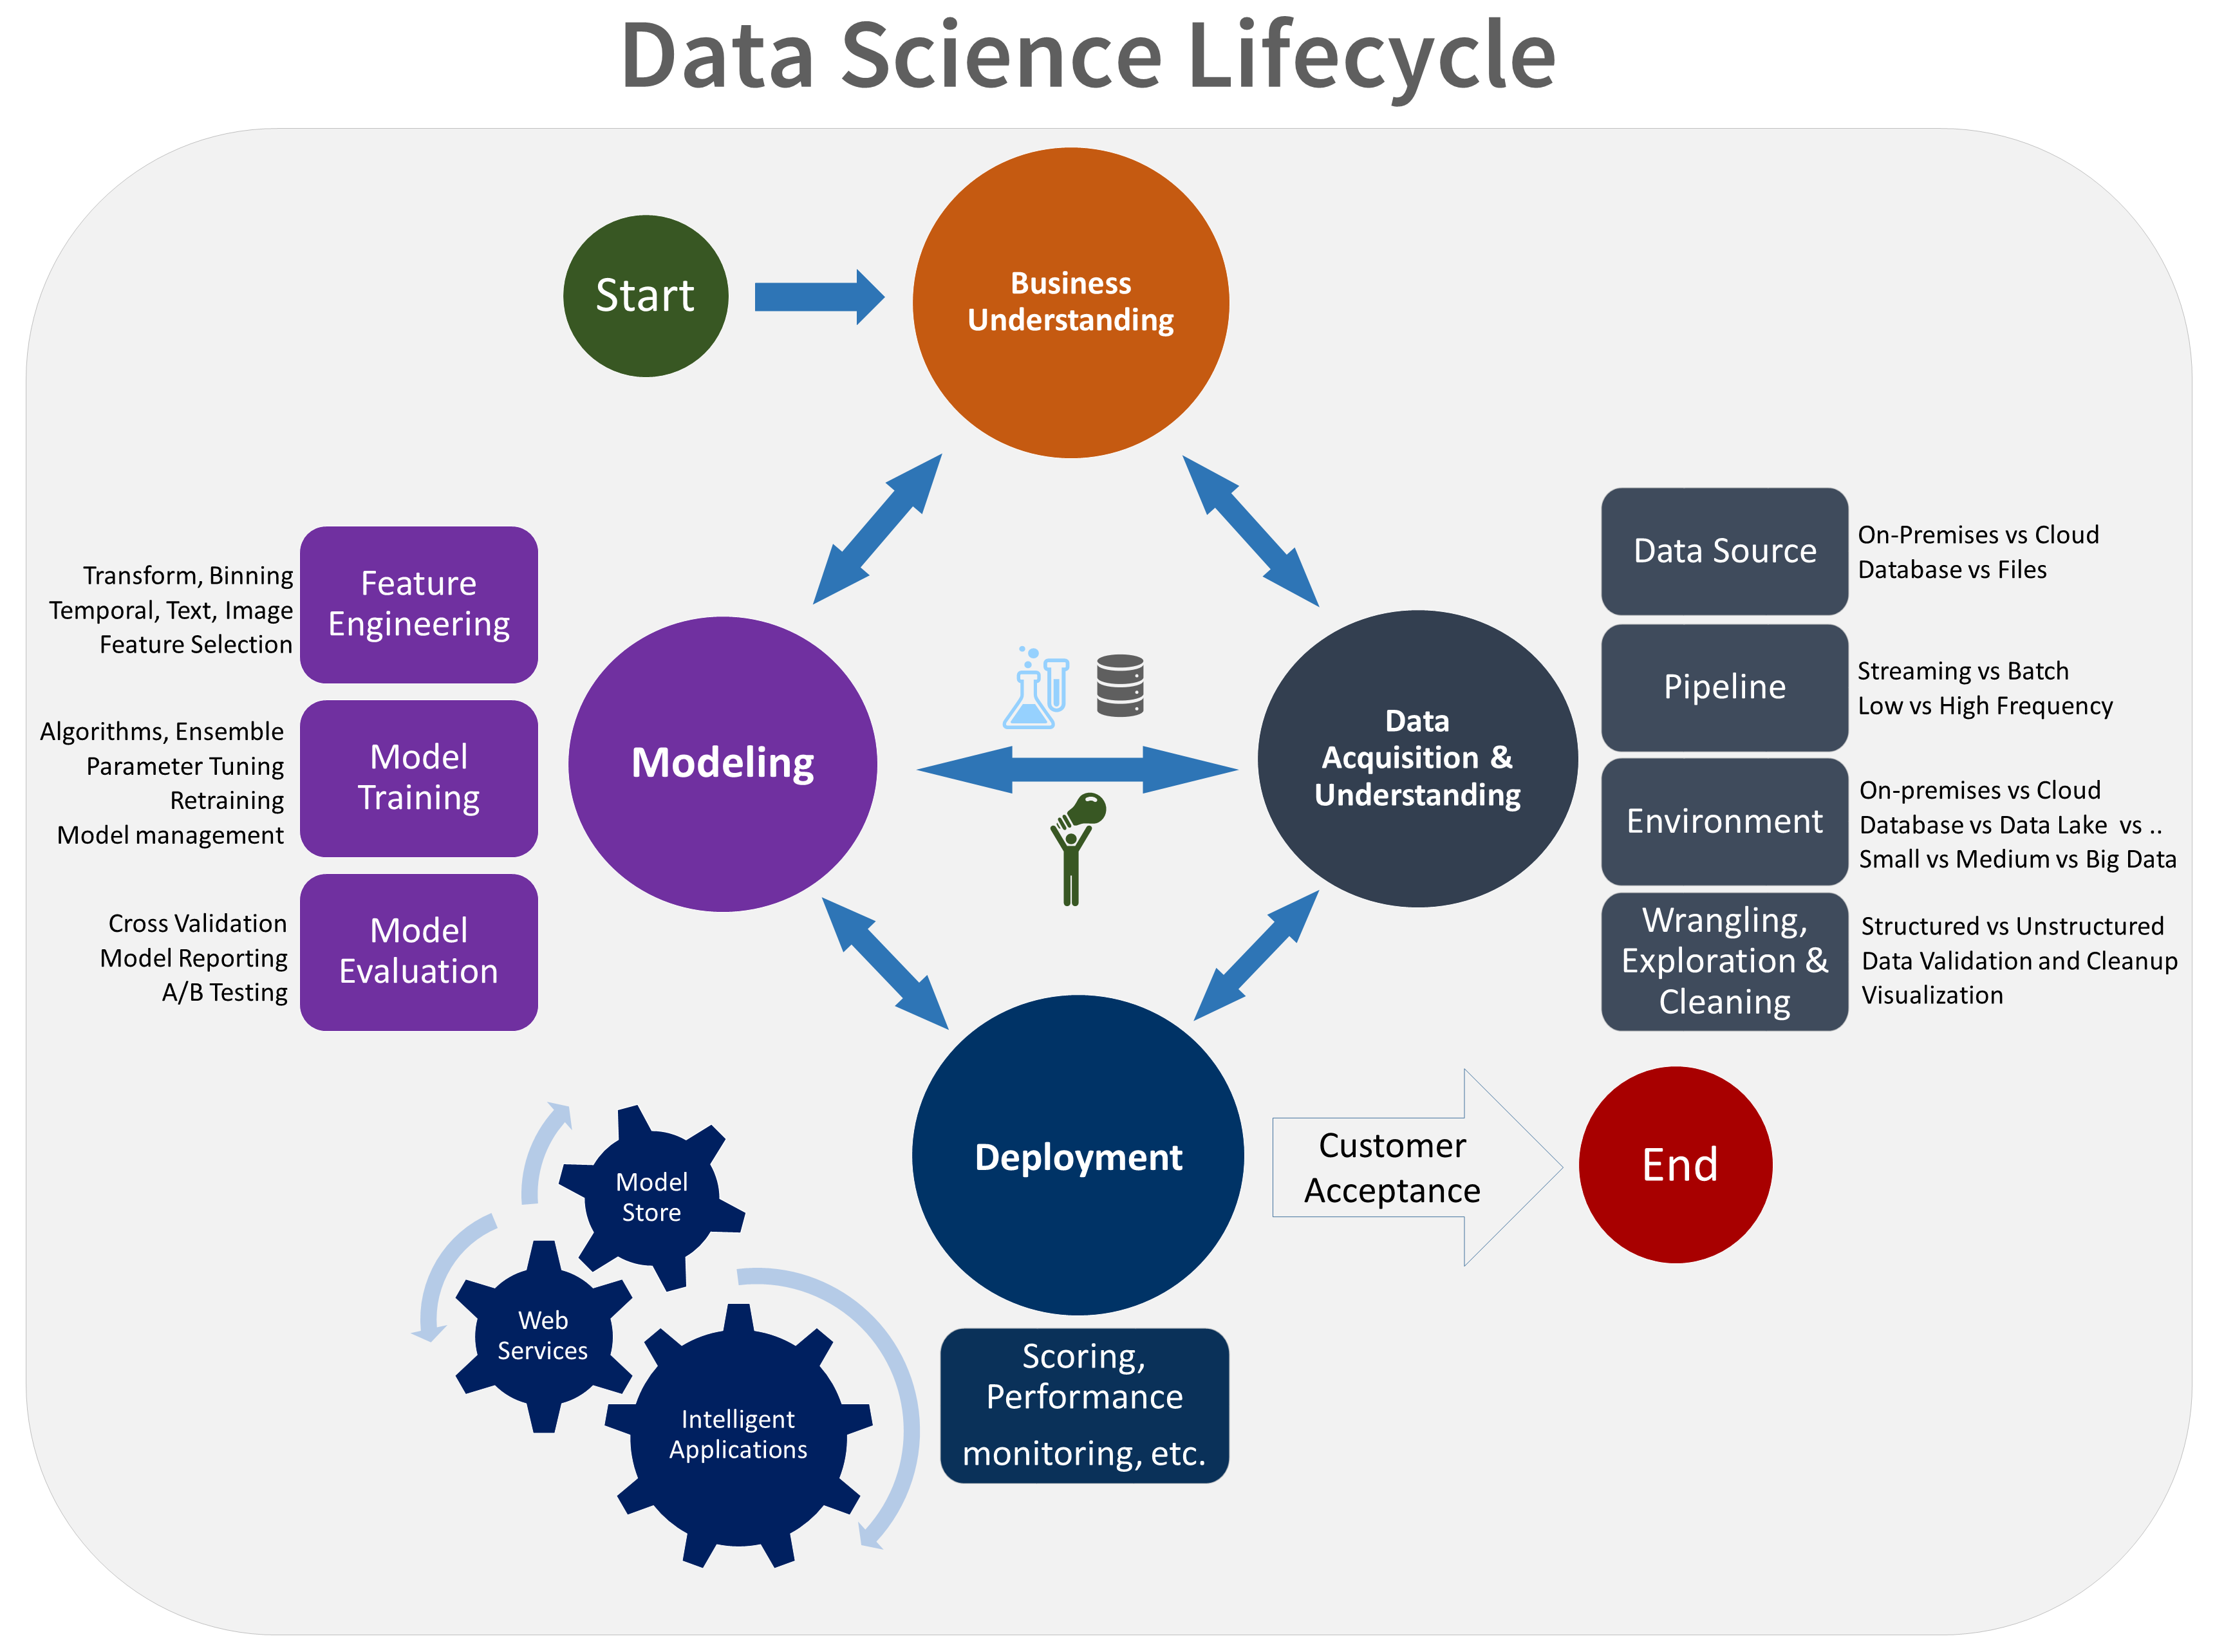 Diagram shows the data science lifecycle, including business understanding, data acquisition / understanding, modeling and deployment.